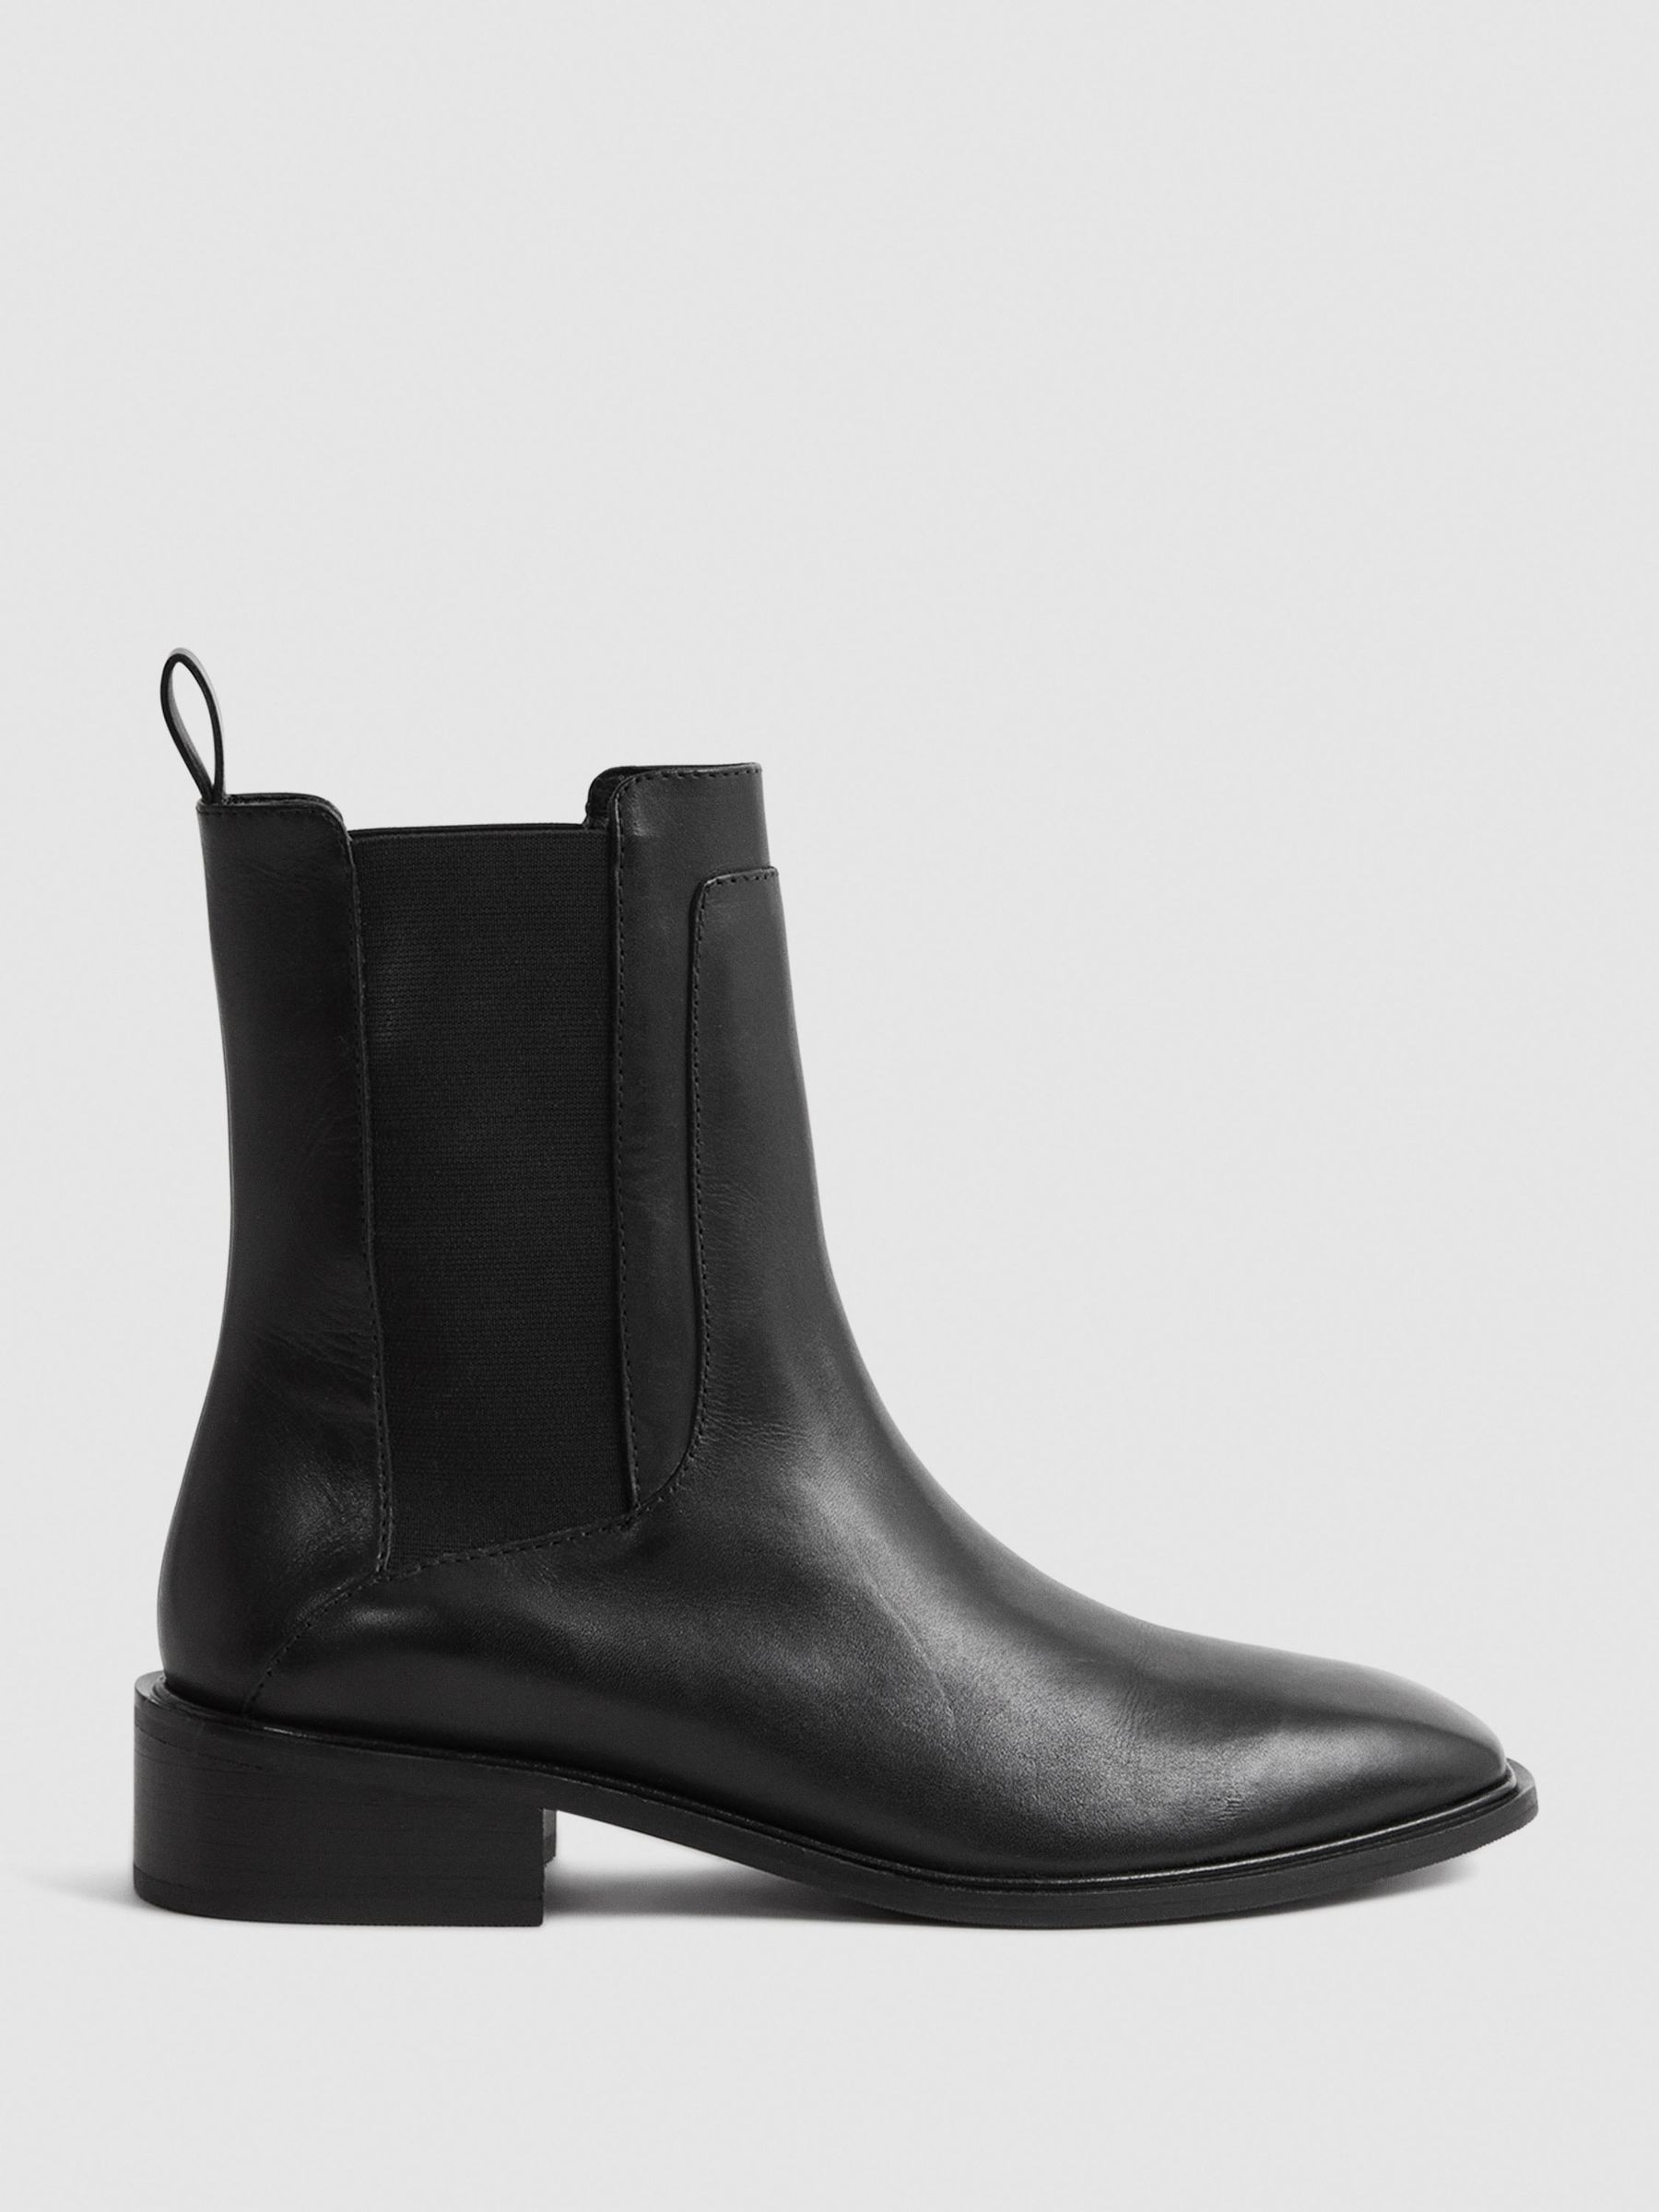 Reiss Willow Leather Chelsea Boots - REISS